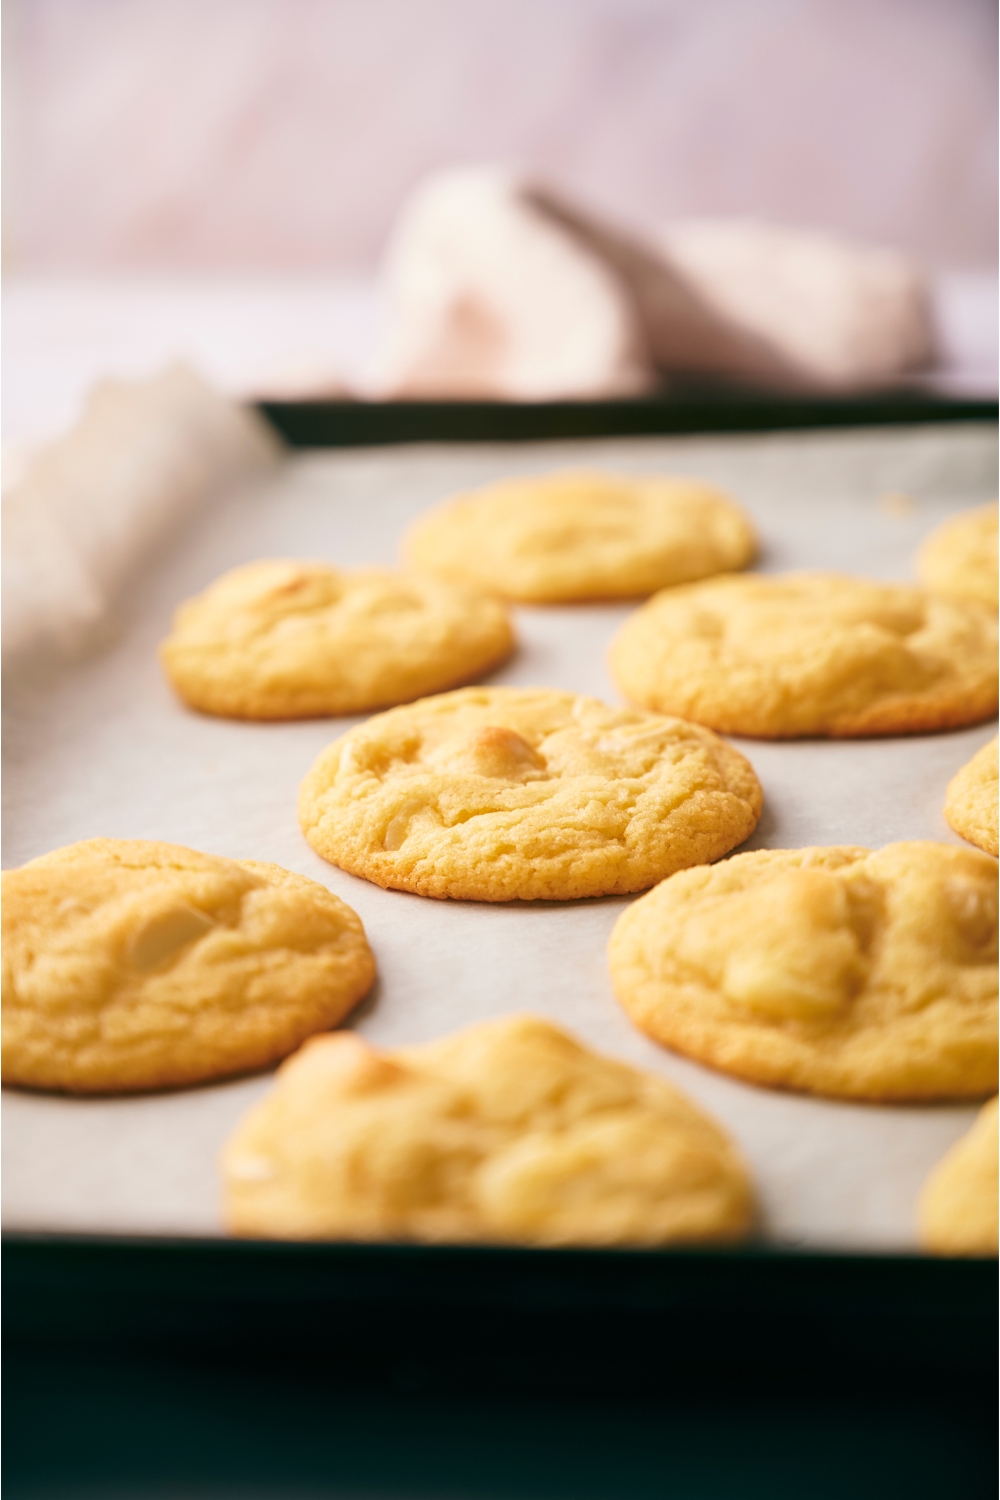 Baking sheet lined with parchment paper with freshly baked cookies spread evenly on the baking sheet.